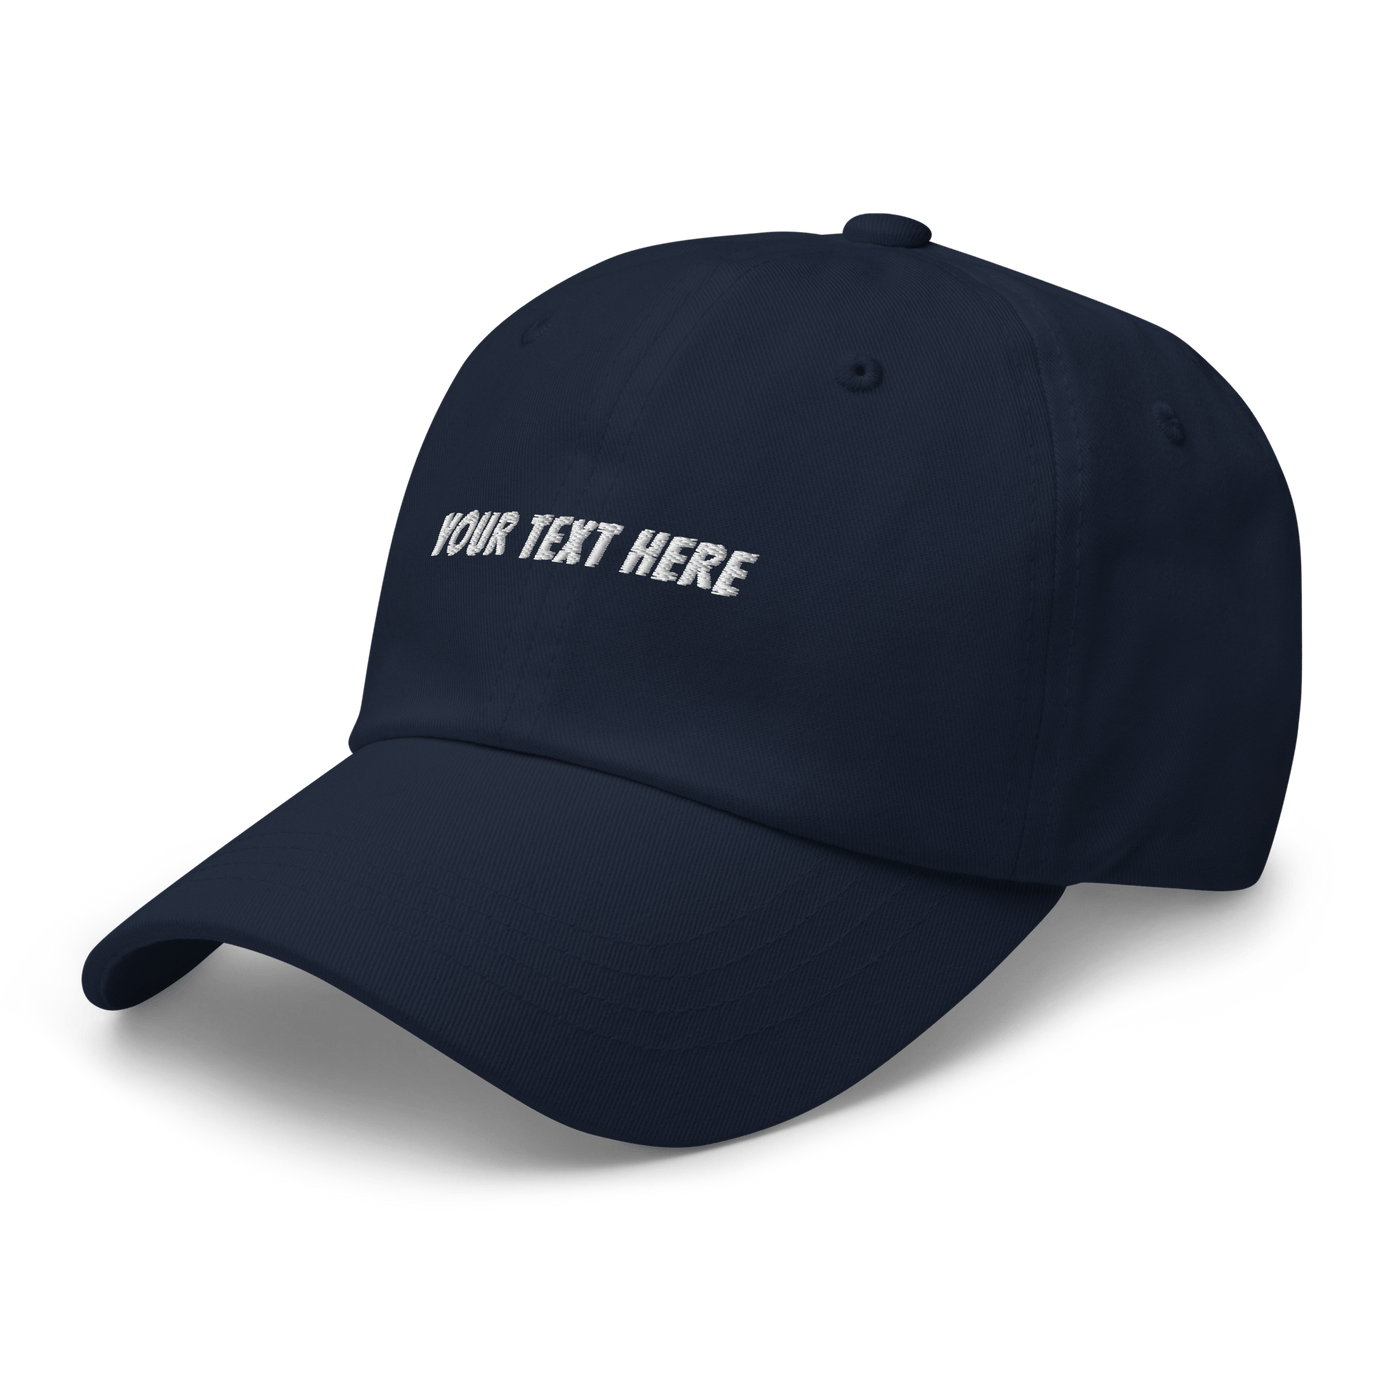 Customize Your Own Dad hat - Banger Font - Navy - - Just Another Cap Store